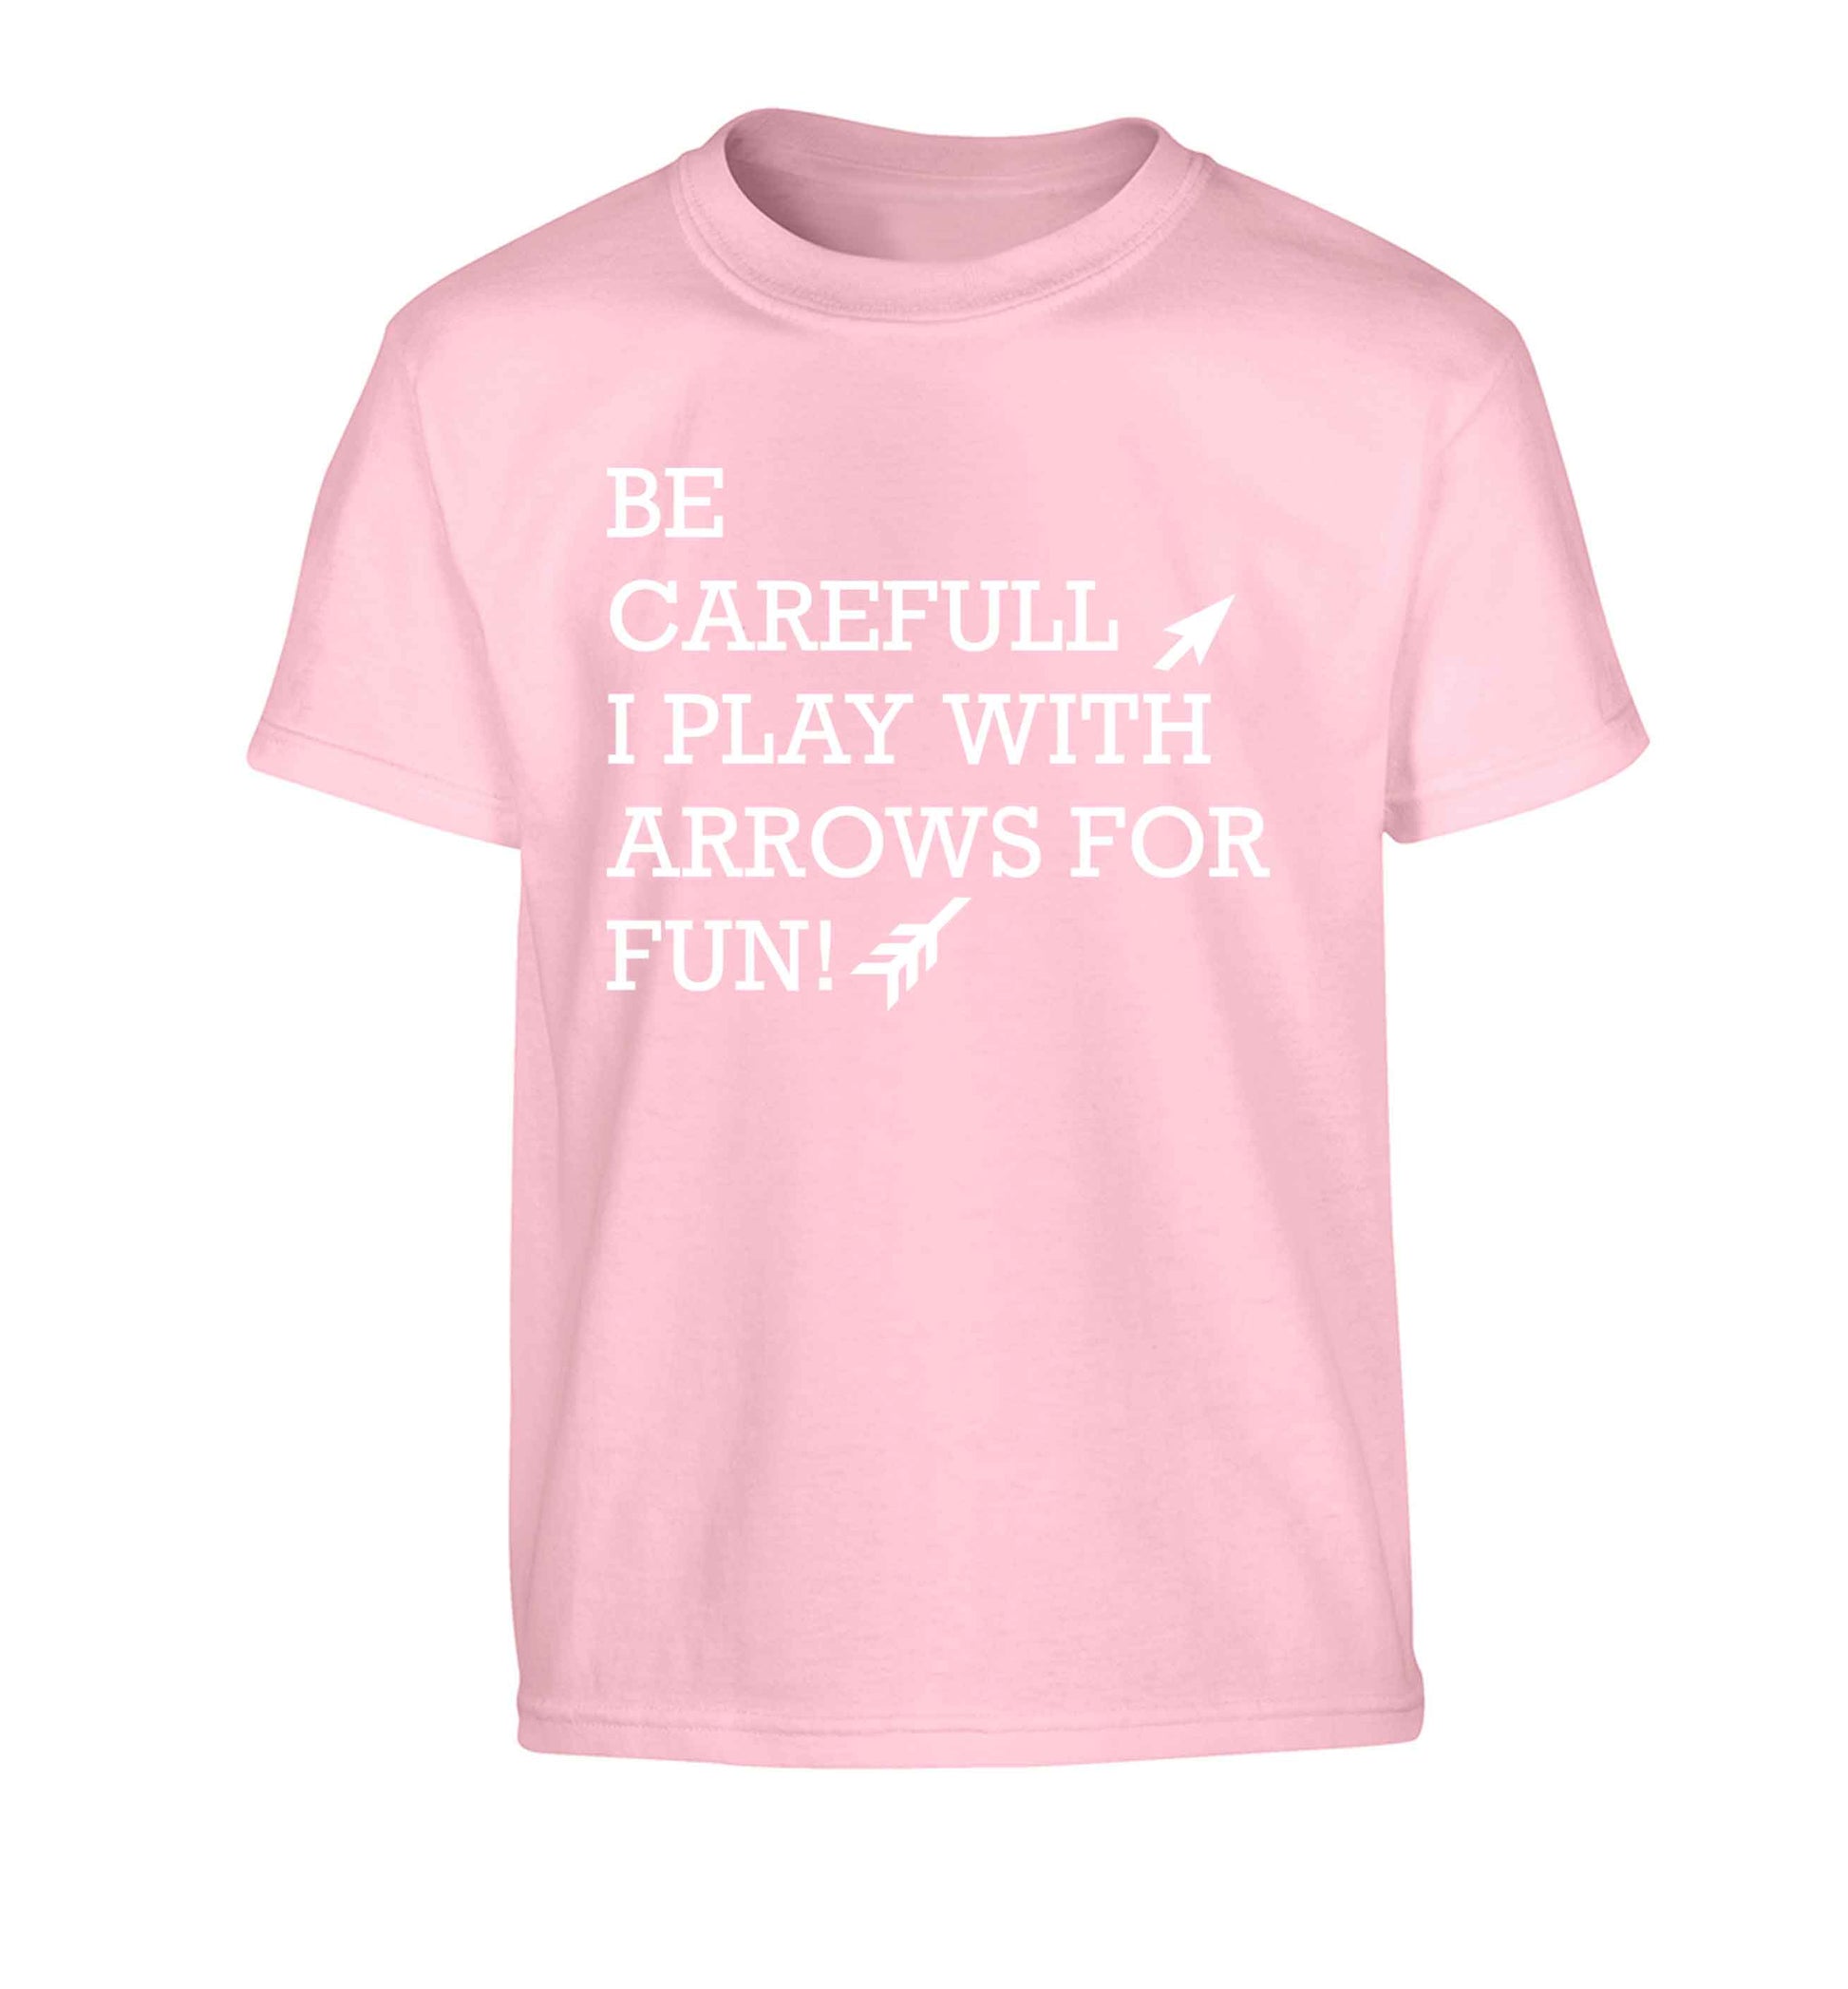 Be carefull I play with arrows for fun Children's light pink Tshirt 12-13 Years